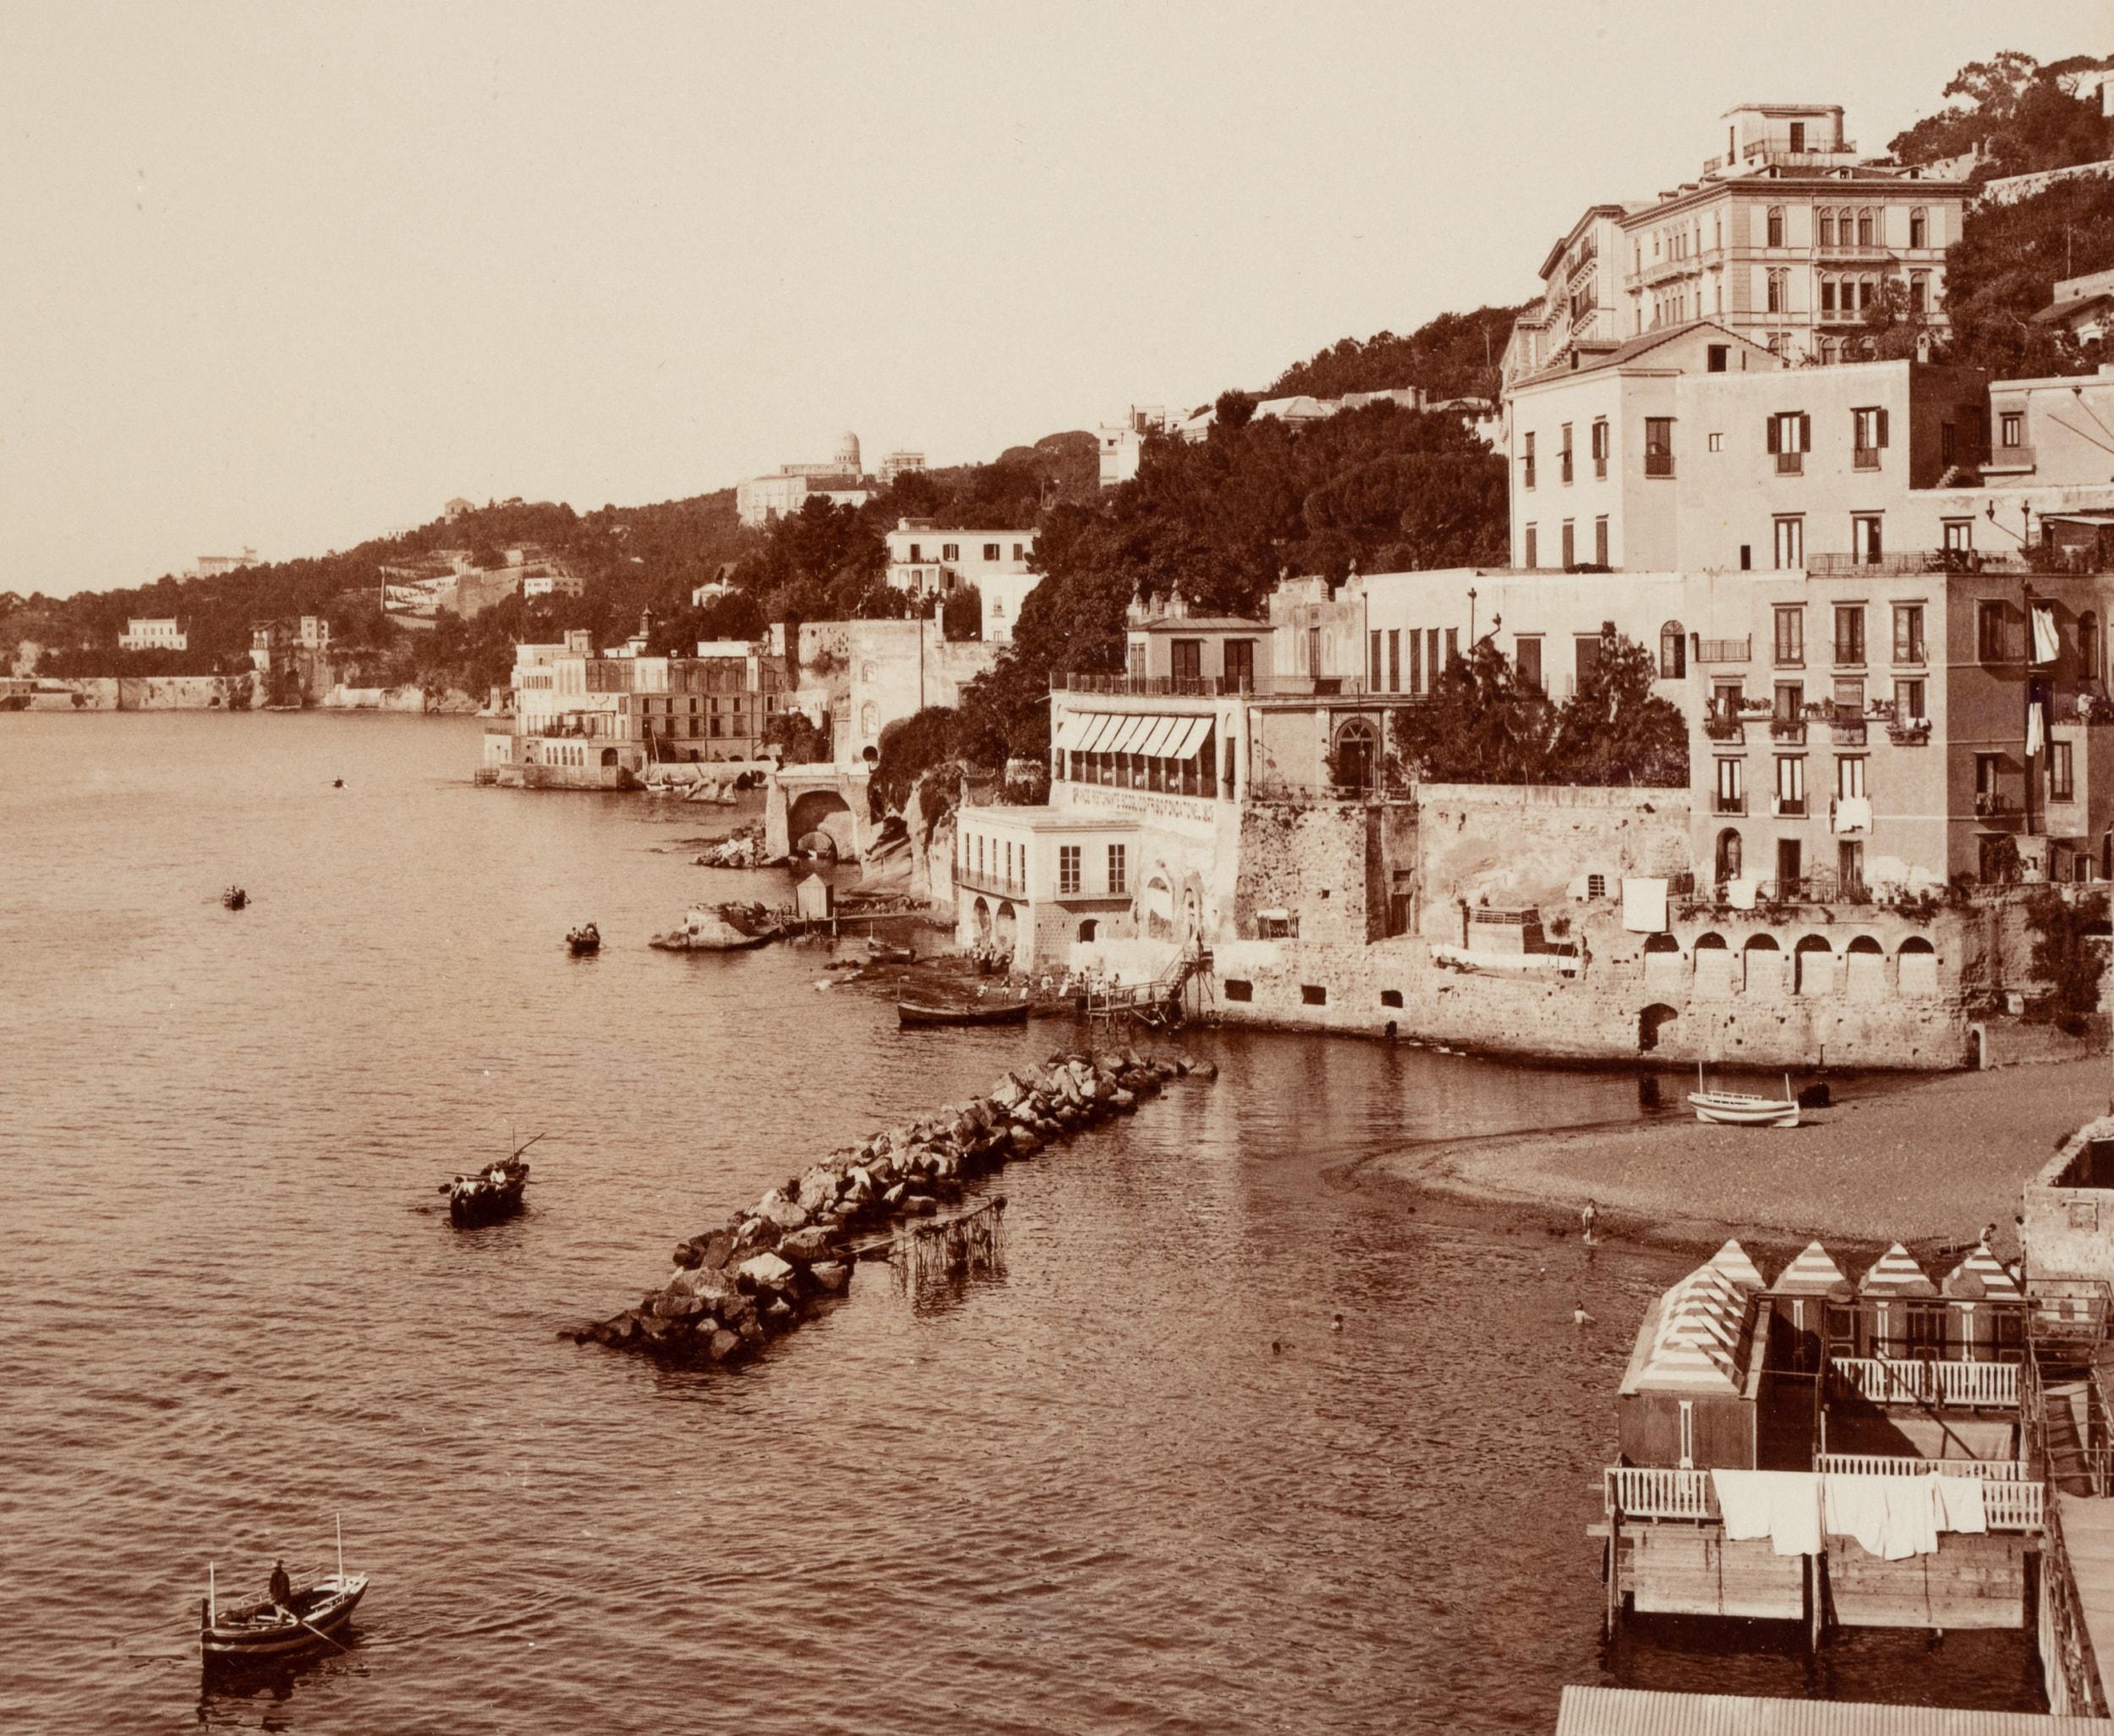 Fratelli Alinari (19th century): View over the bay of Posillipo, district of Naples, c. 1880, albumen paper print

Technique: albumen paper print

Inscription: Lower middle signed in the printing plate: 